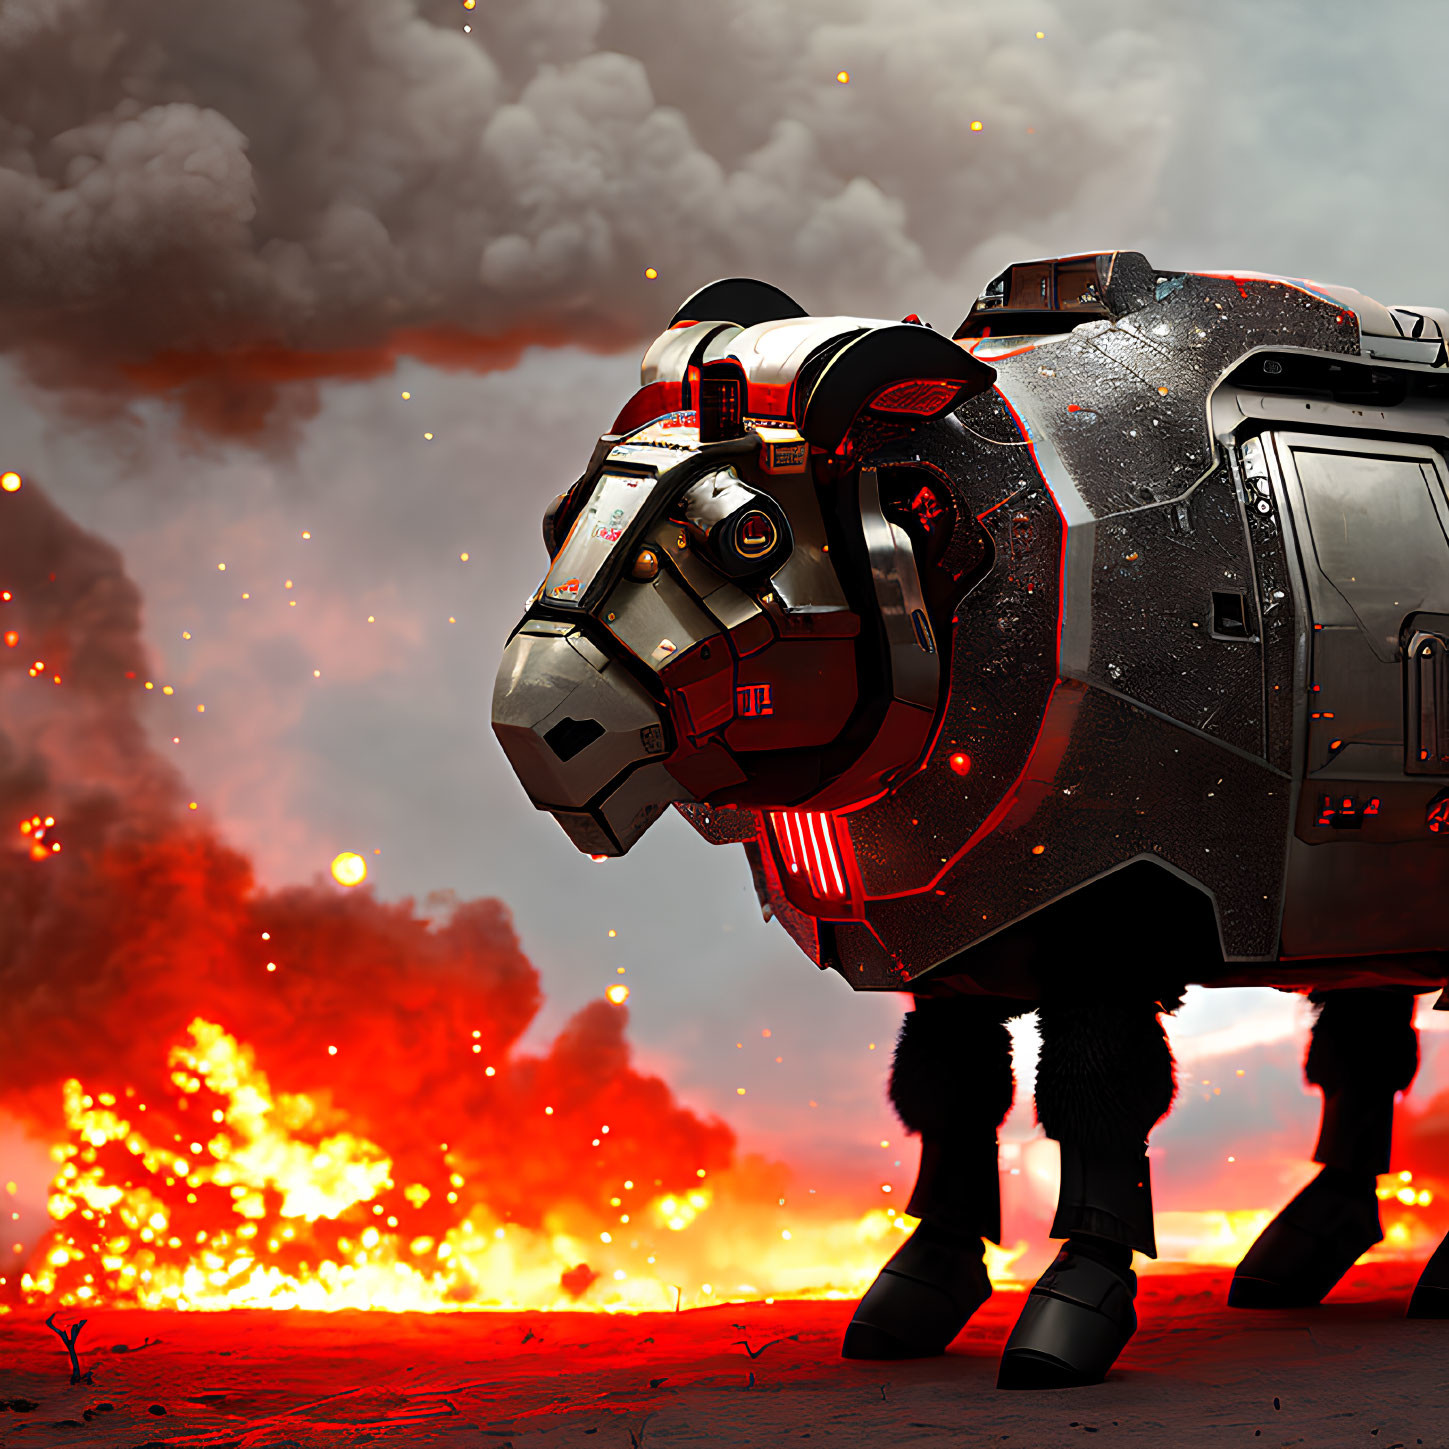 Futuristic robotic horse on fiery battlefield with glowing red elements